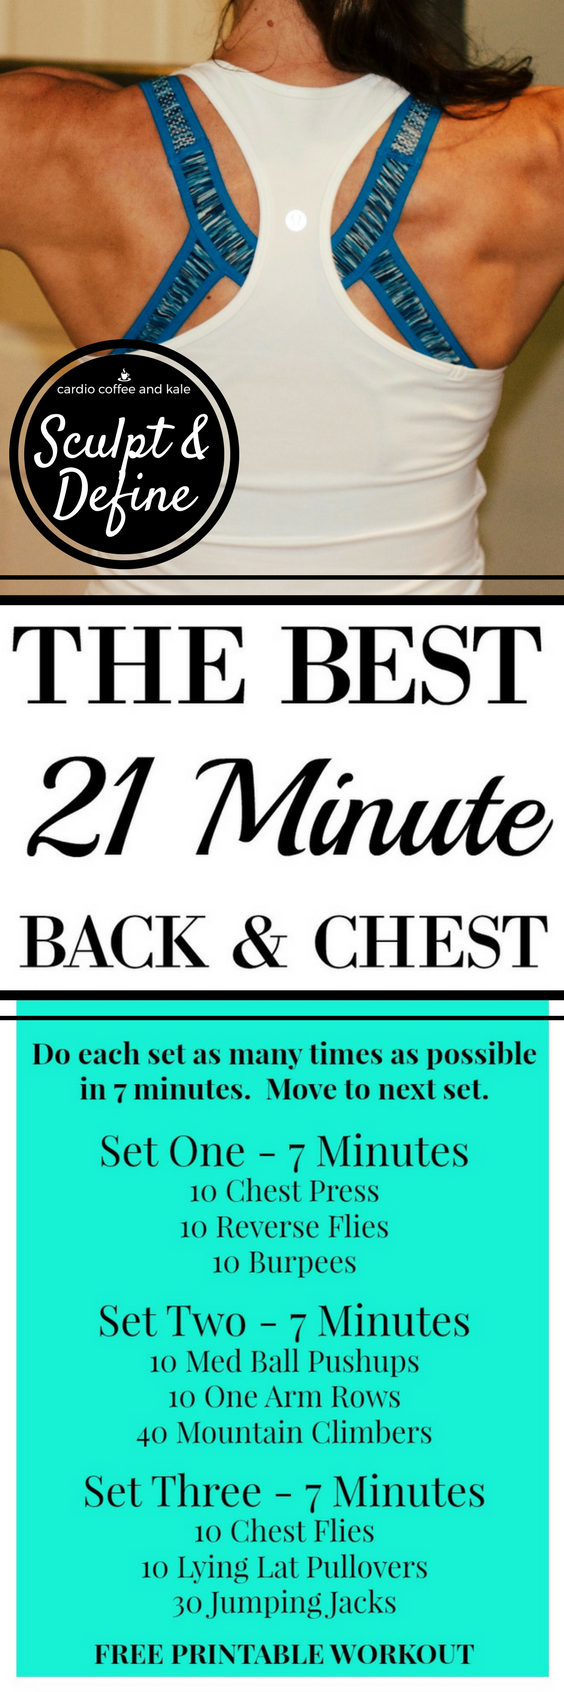 The Best 21 Minute Chest and Back Workout! — cardio coffee and kale